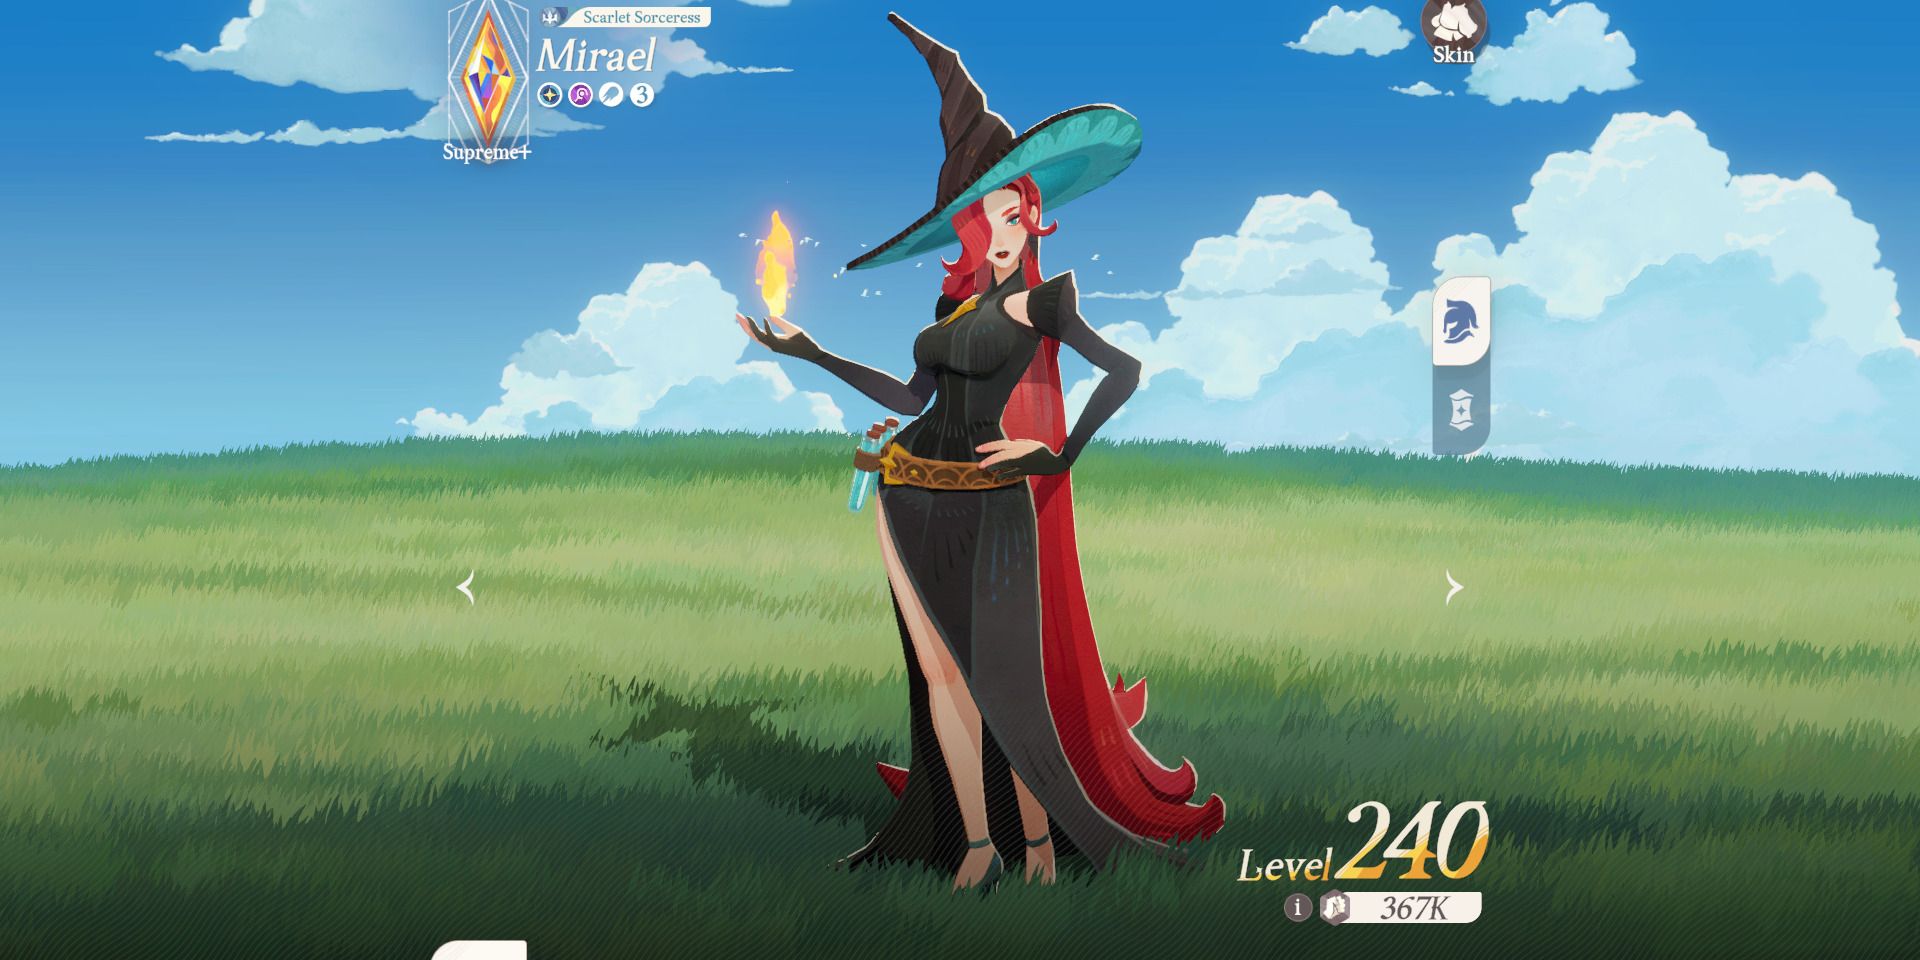 Image of the mage character Mirael in AFK Journey